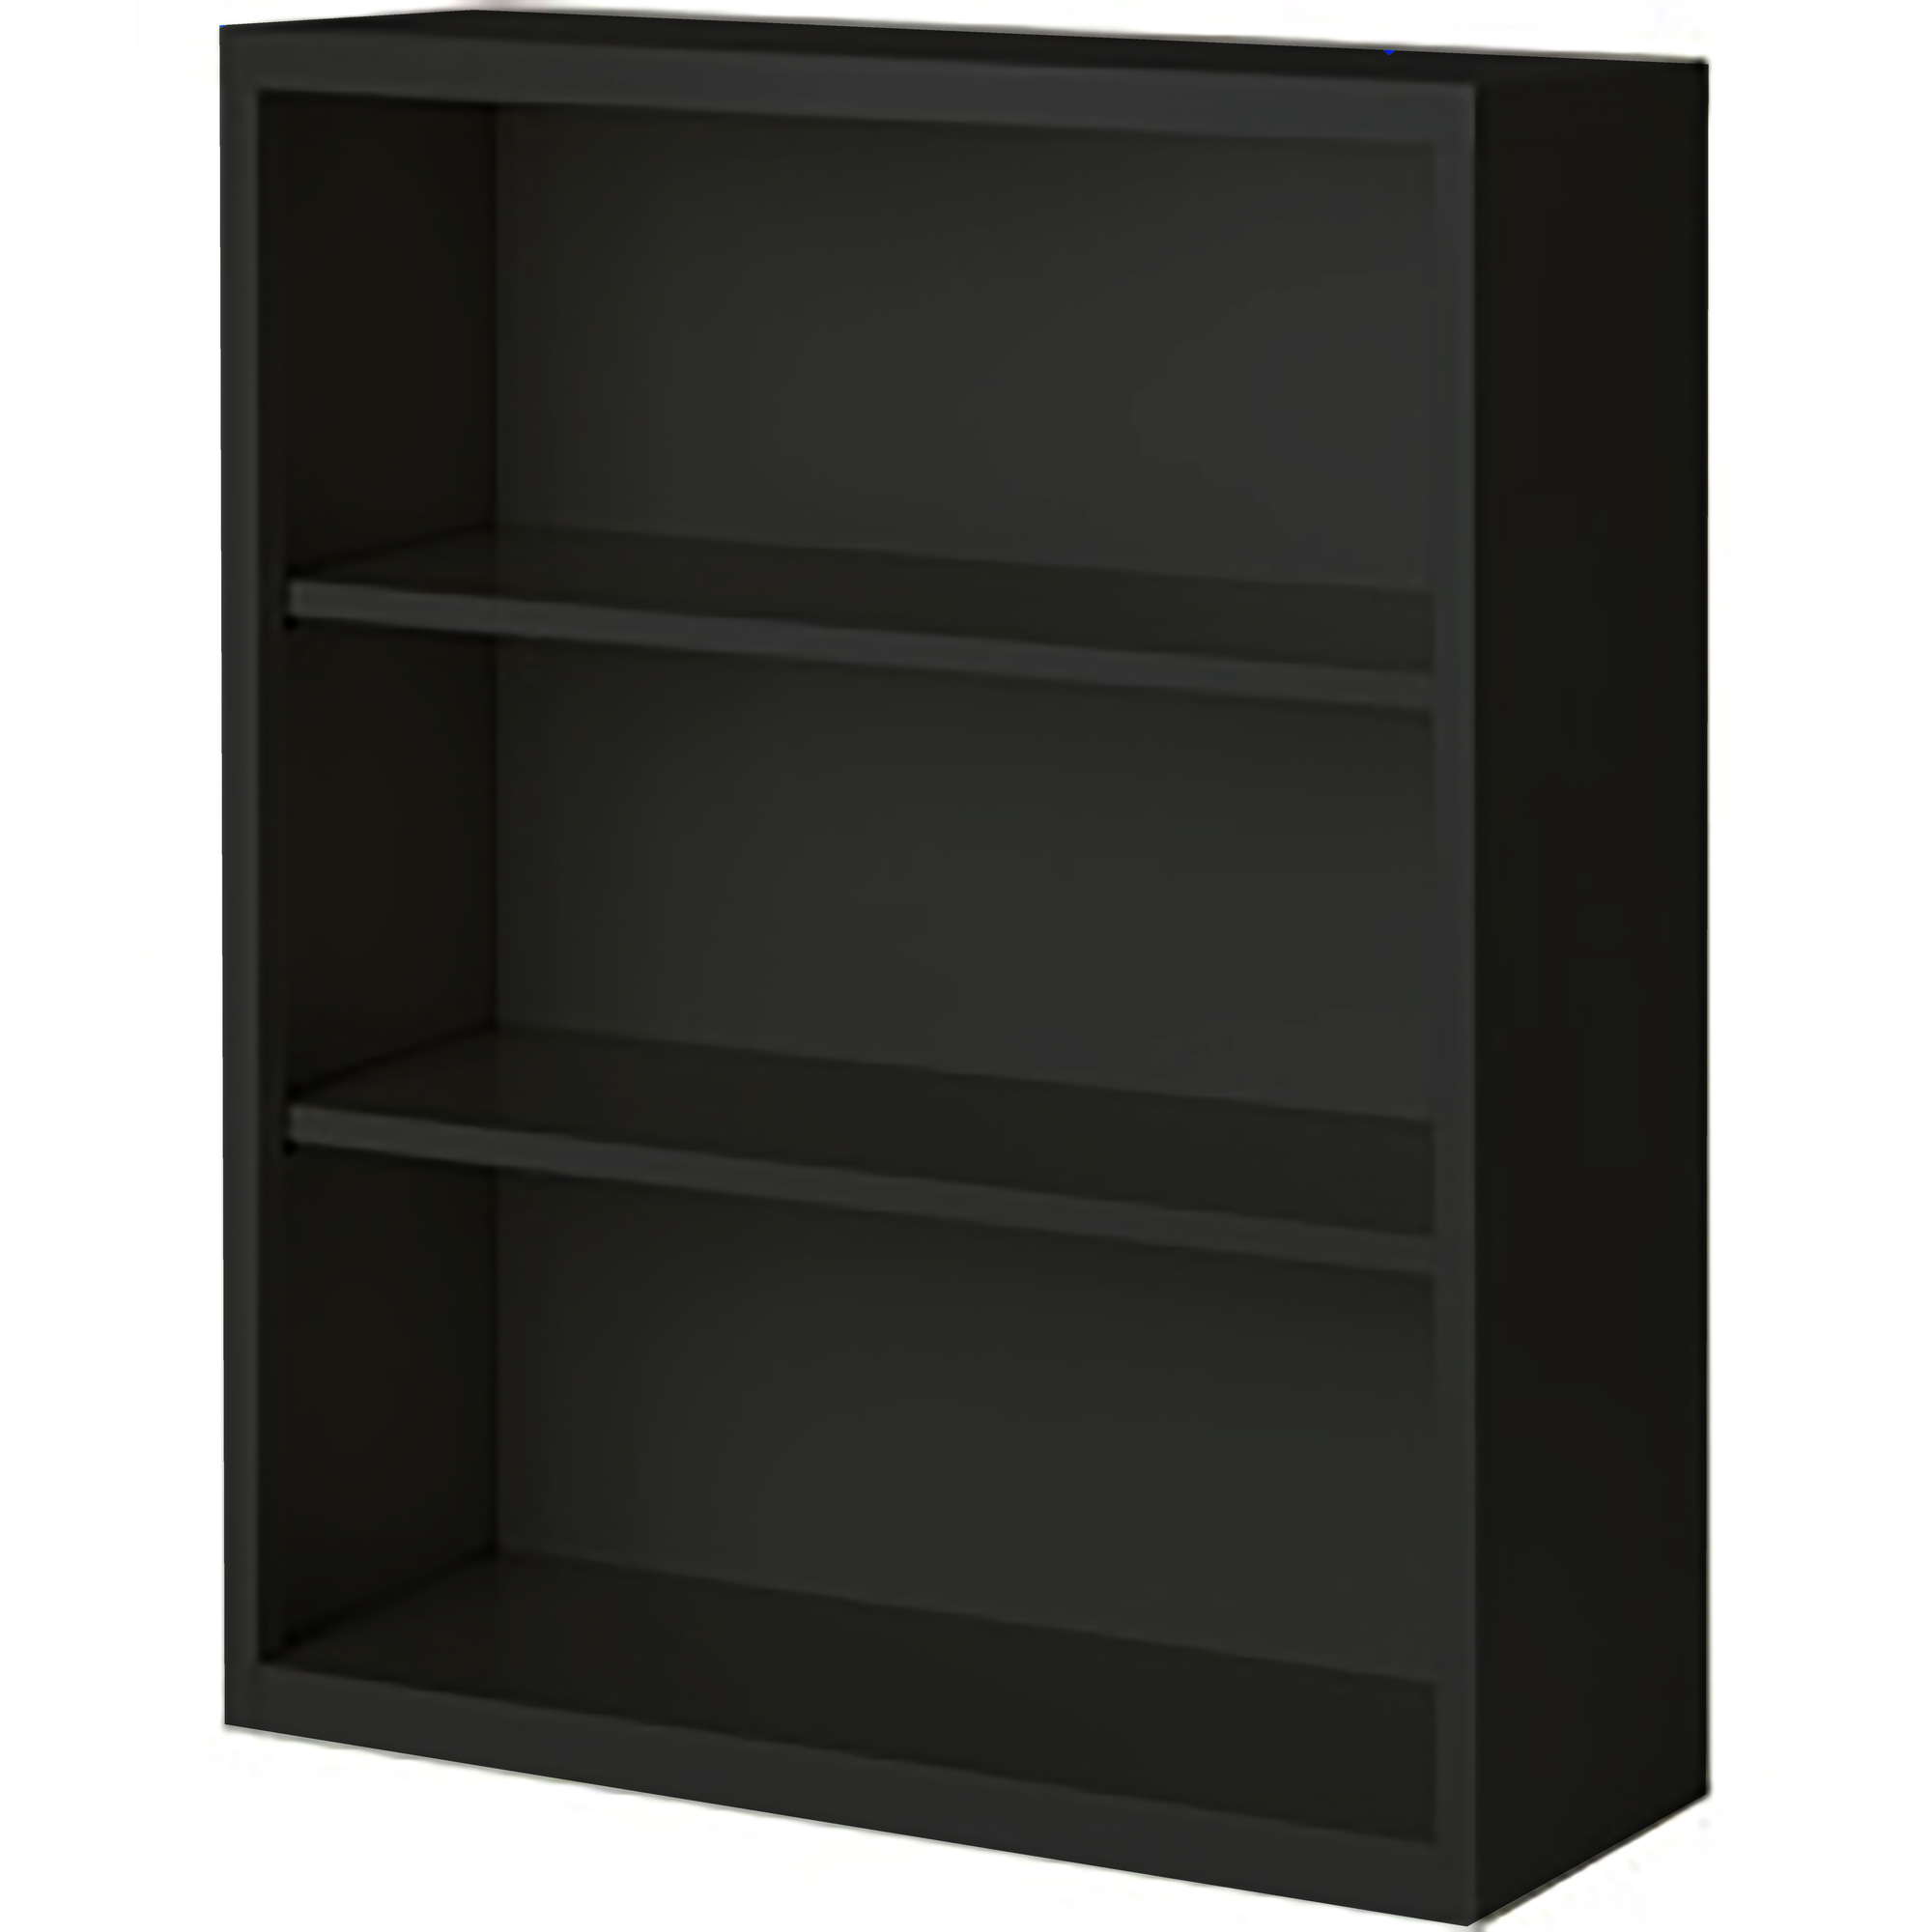 Steel Cabinets USA, 36Inchx13Inchx42Inch Black Bookcase Steel Fully Assembled, Height 42 in, Shelves (qty.) 3, Material Steel, Model BCA-364213-B